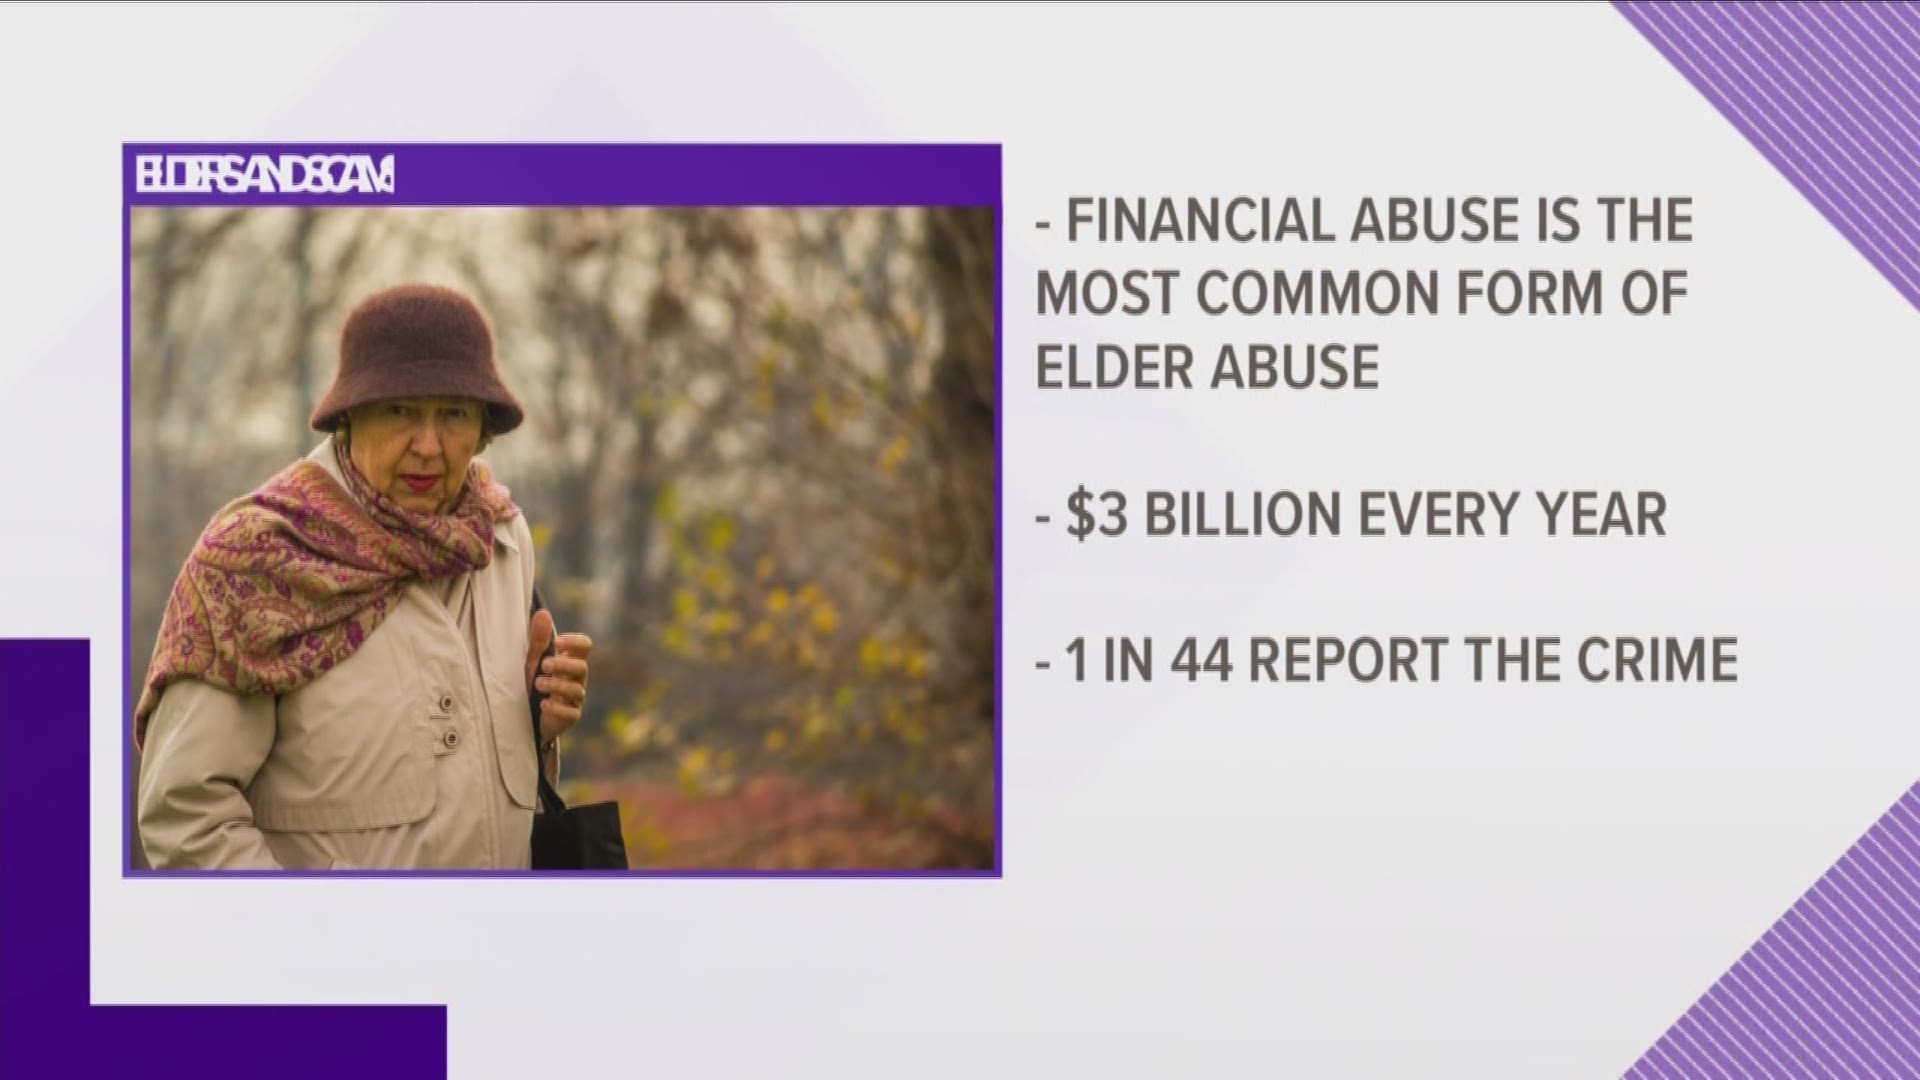 Scammers are aggressively targeting older Americans, but you can protect them.